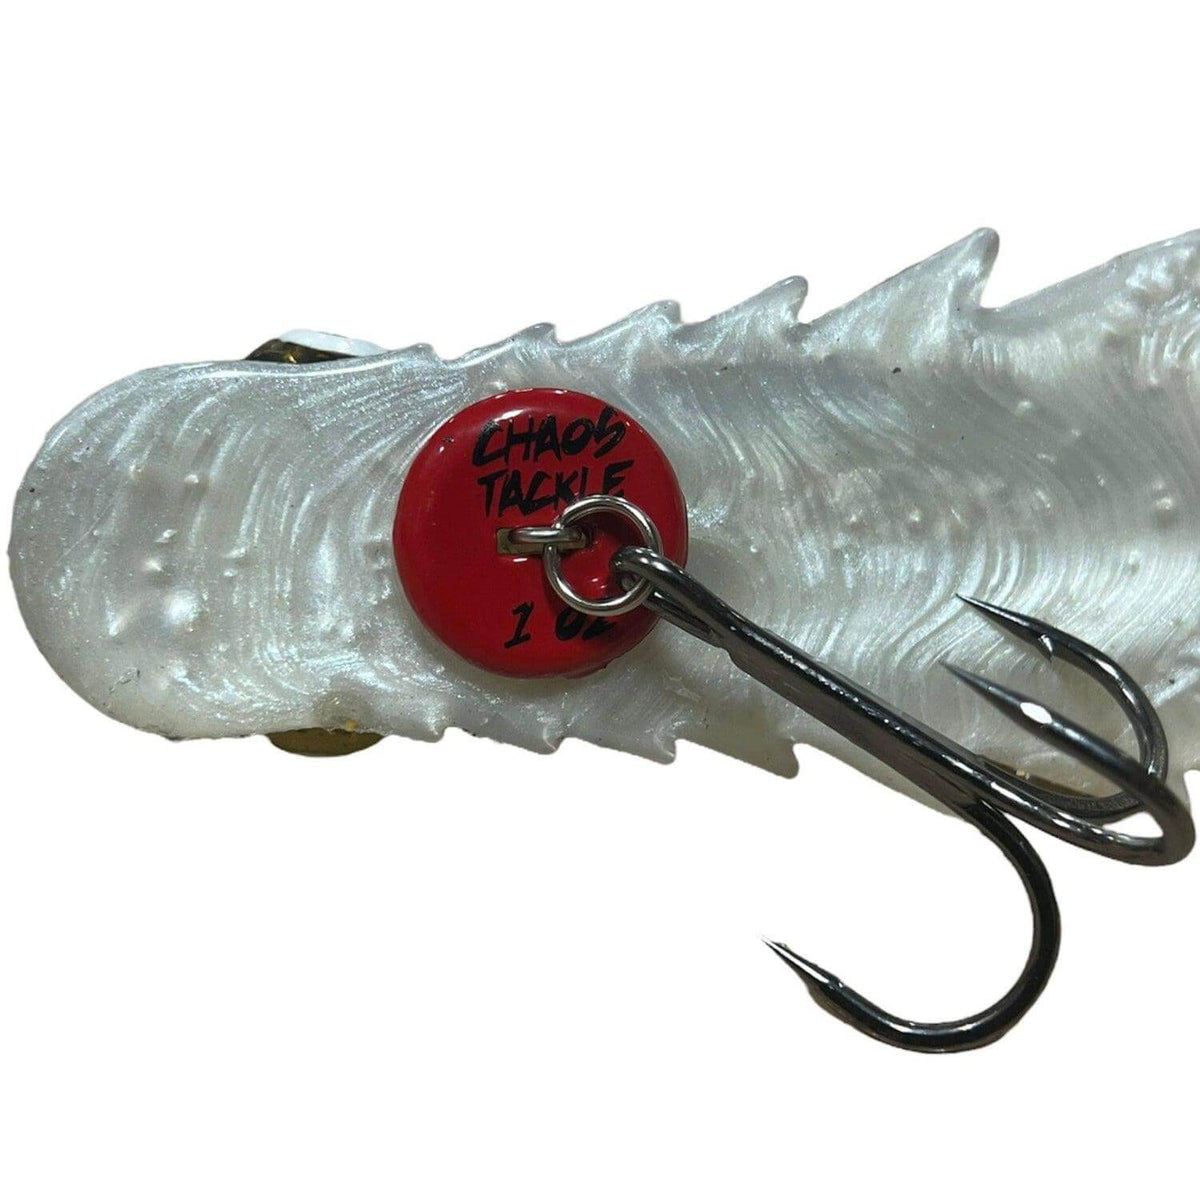 View of Weights Chaos Tackle Deep Threat Weights (2pk) available at EZOKO Pike and Musky Shop